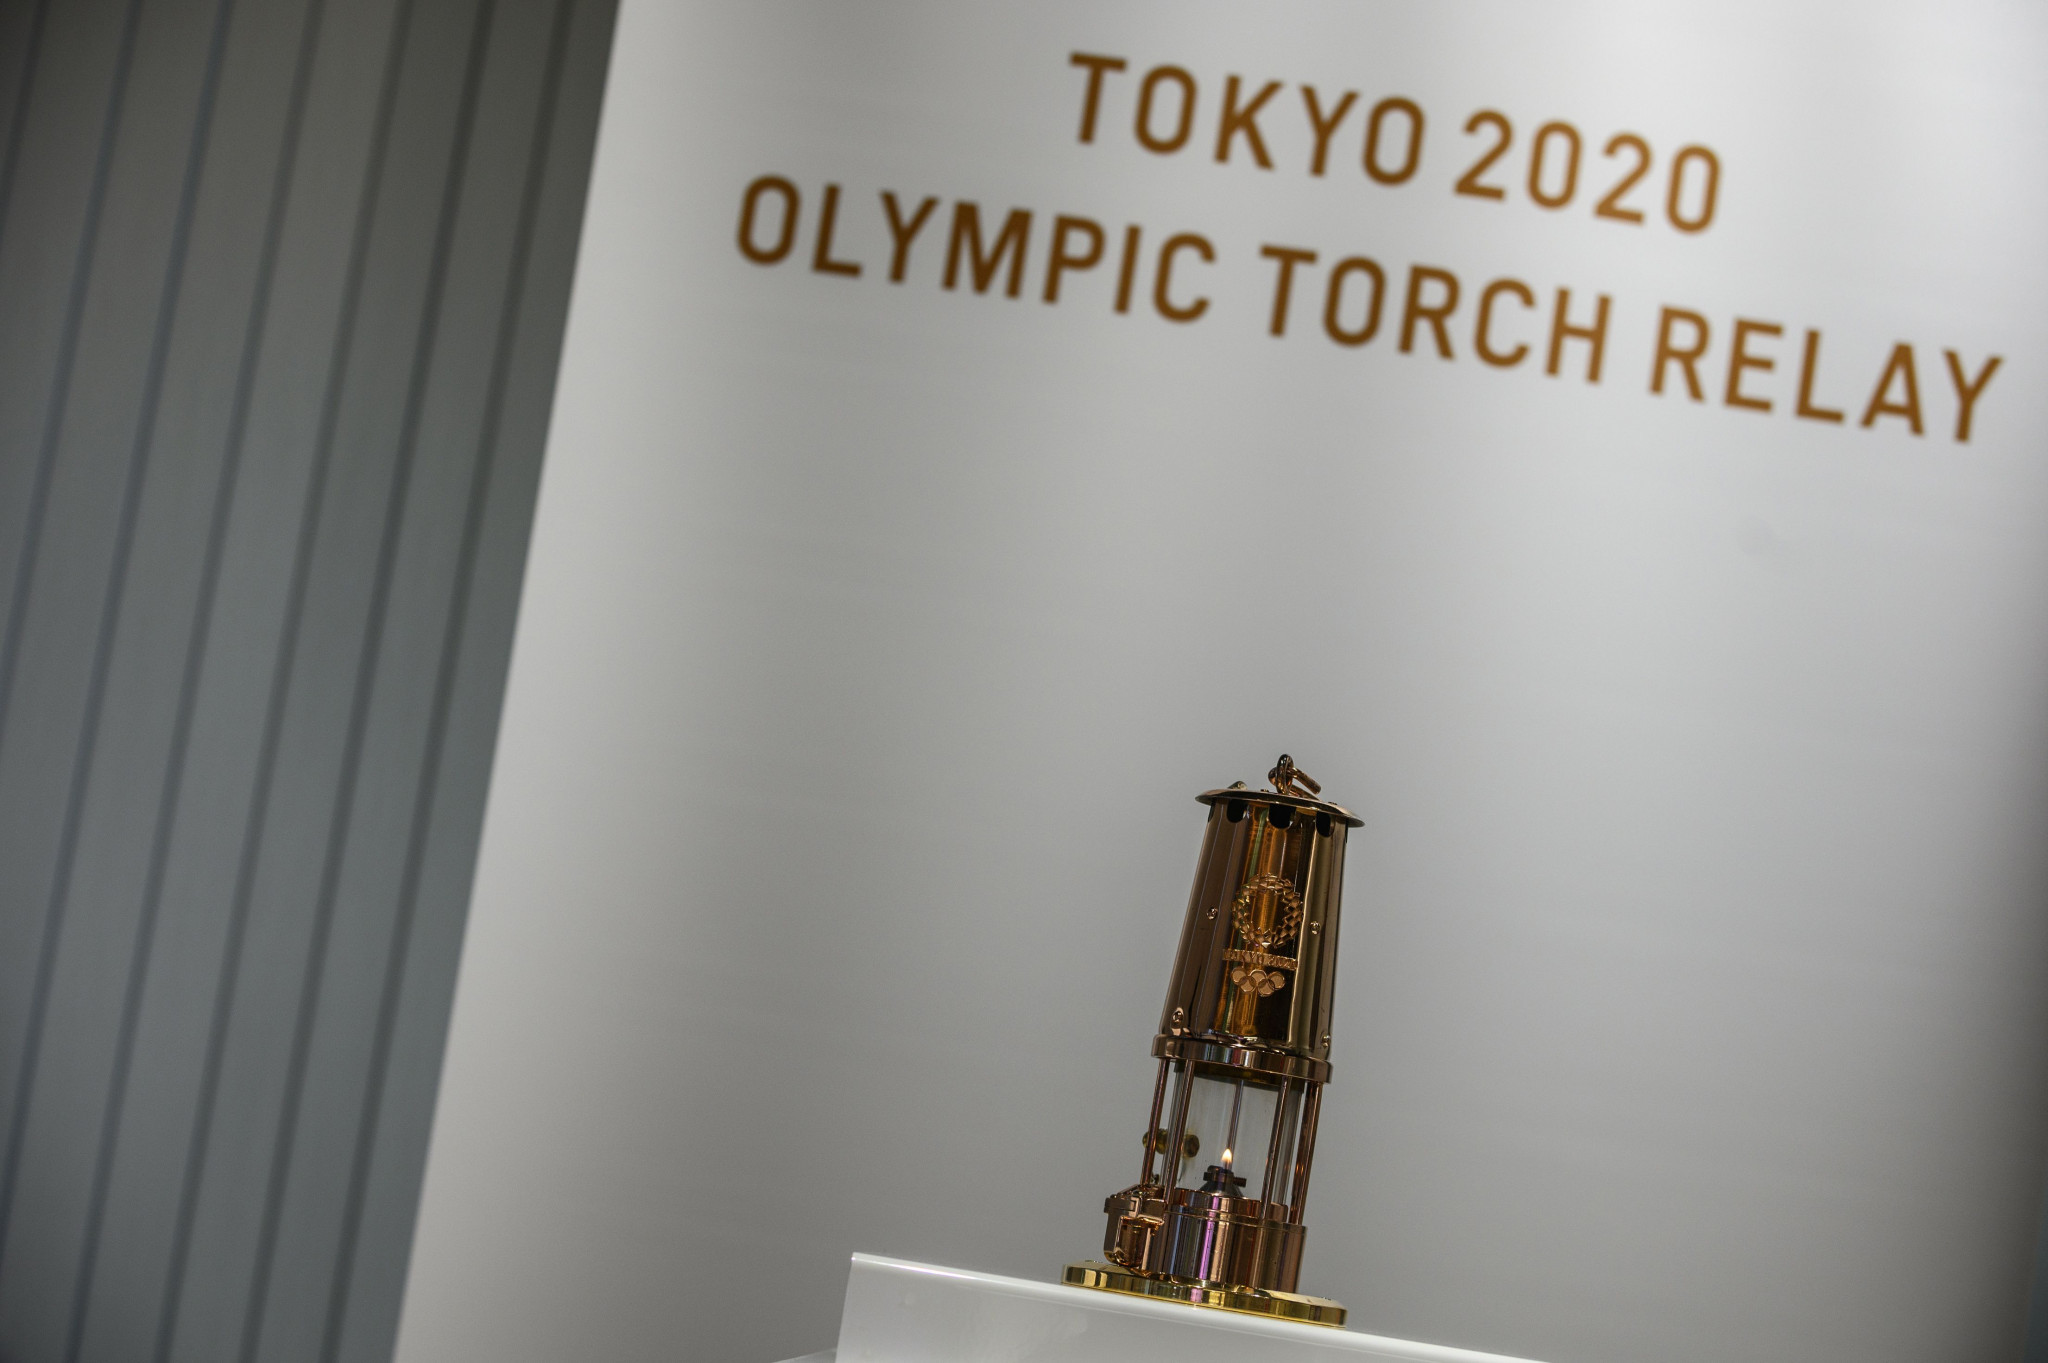 The Tokyo 2020 Olympic Torch Relay is scheduled to resume next month ©Getty Images